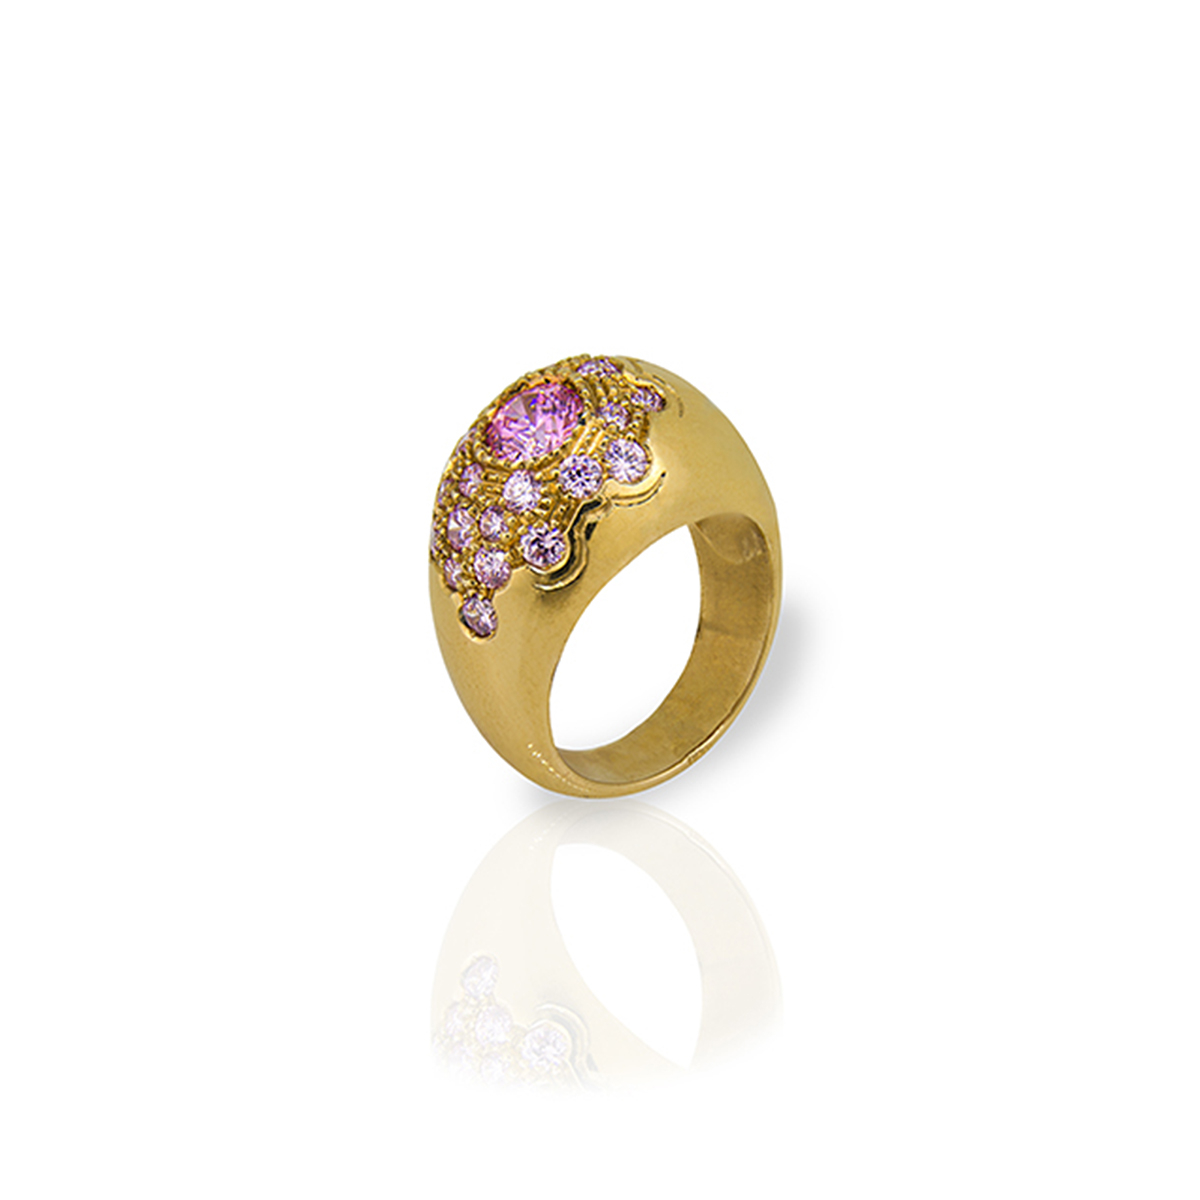 Bronze egg-shaped ring paved with pink zircon